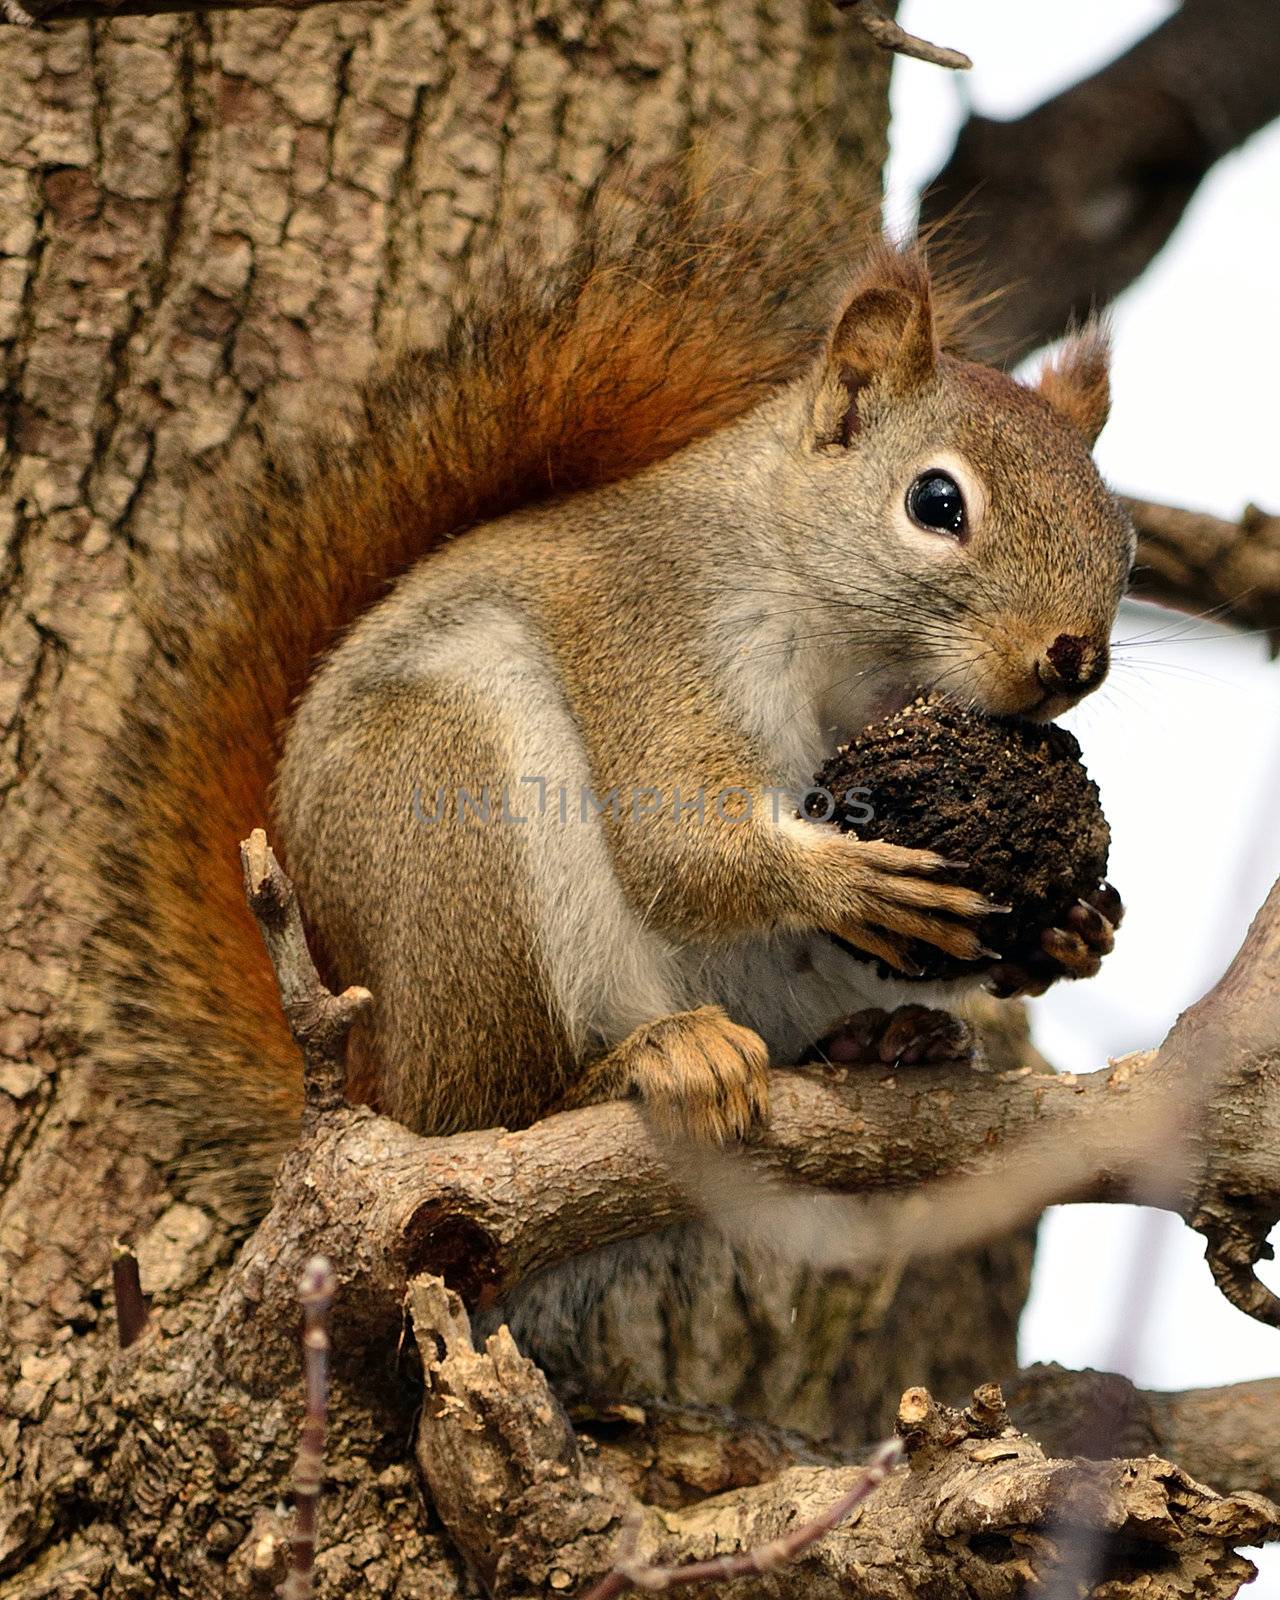 A red squirrel perched in a tree eating a walnut.